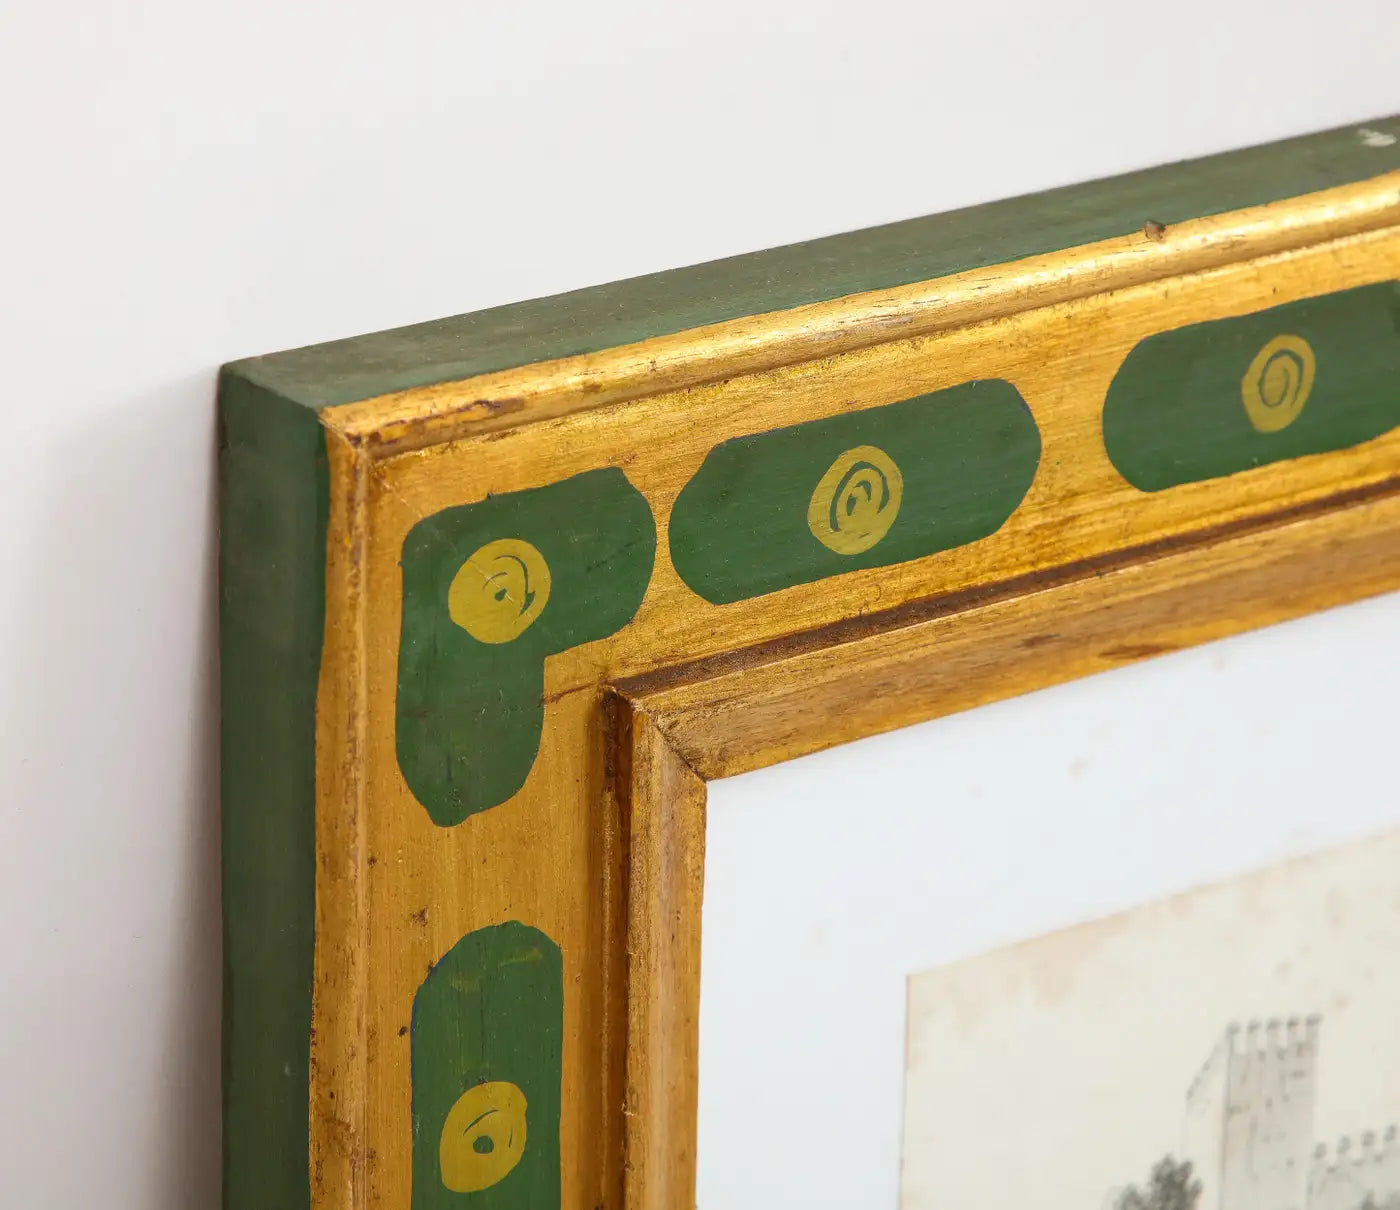 19th Century Italian Drawing in Original Hand Painted Green and Gilt Frame